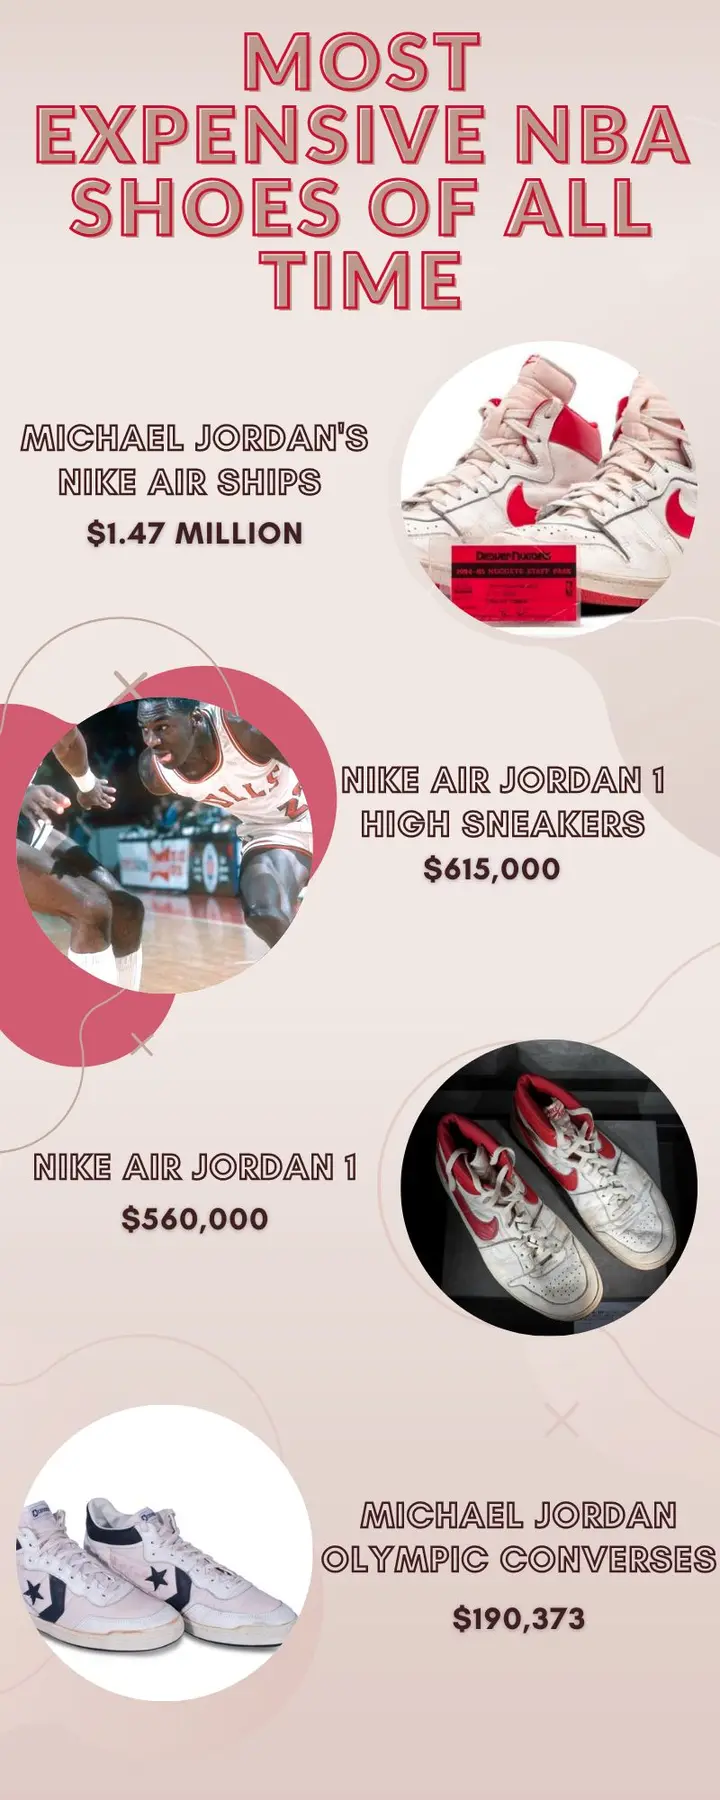 Most expensive NBA shoes of all time